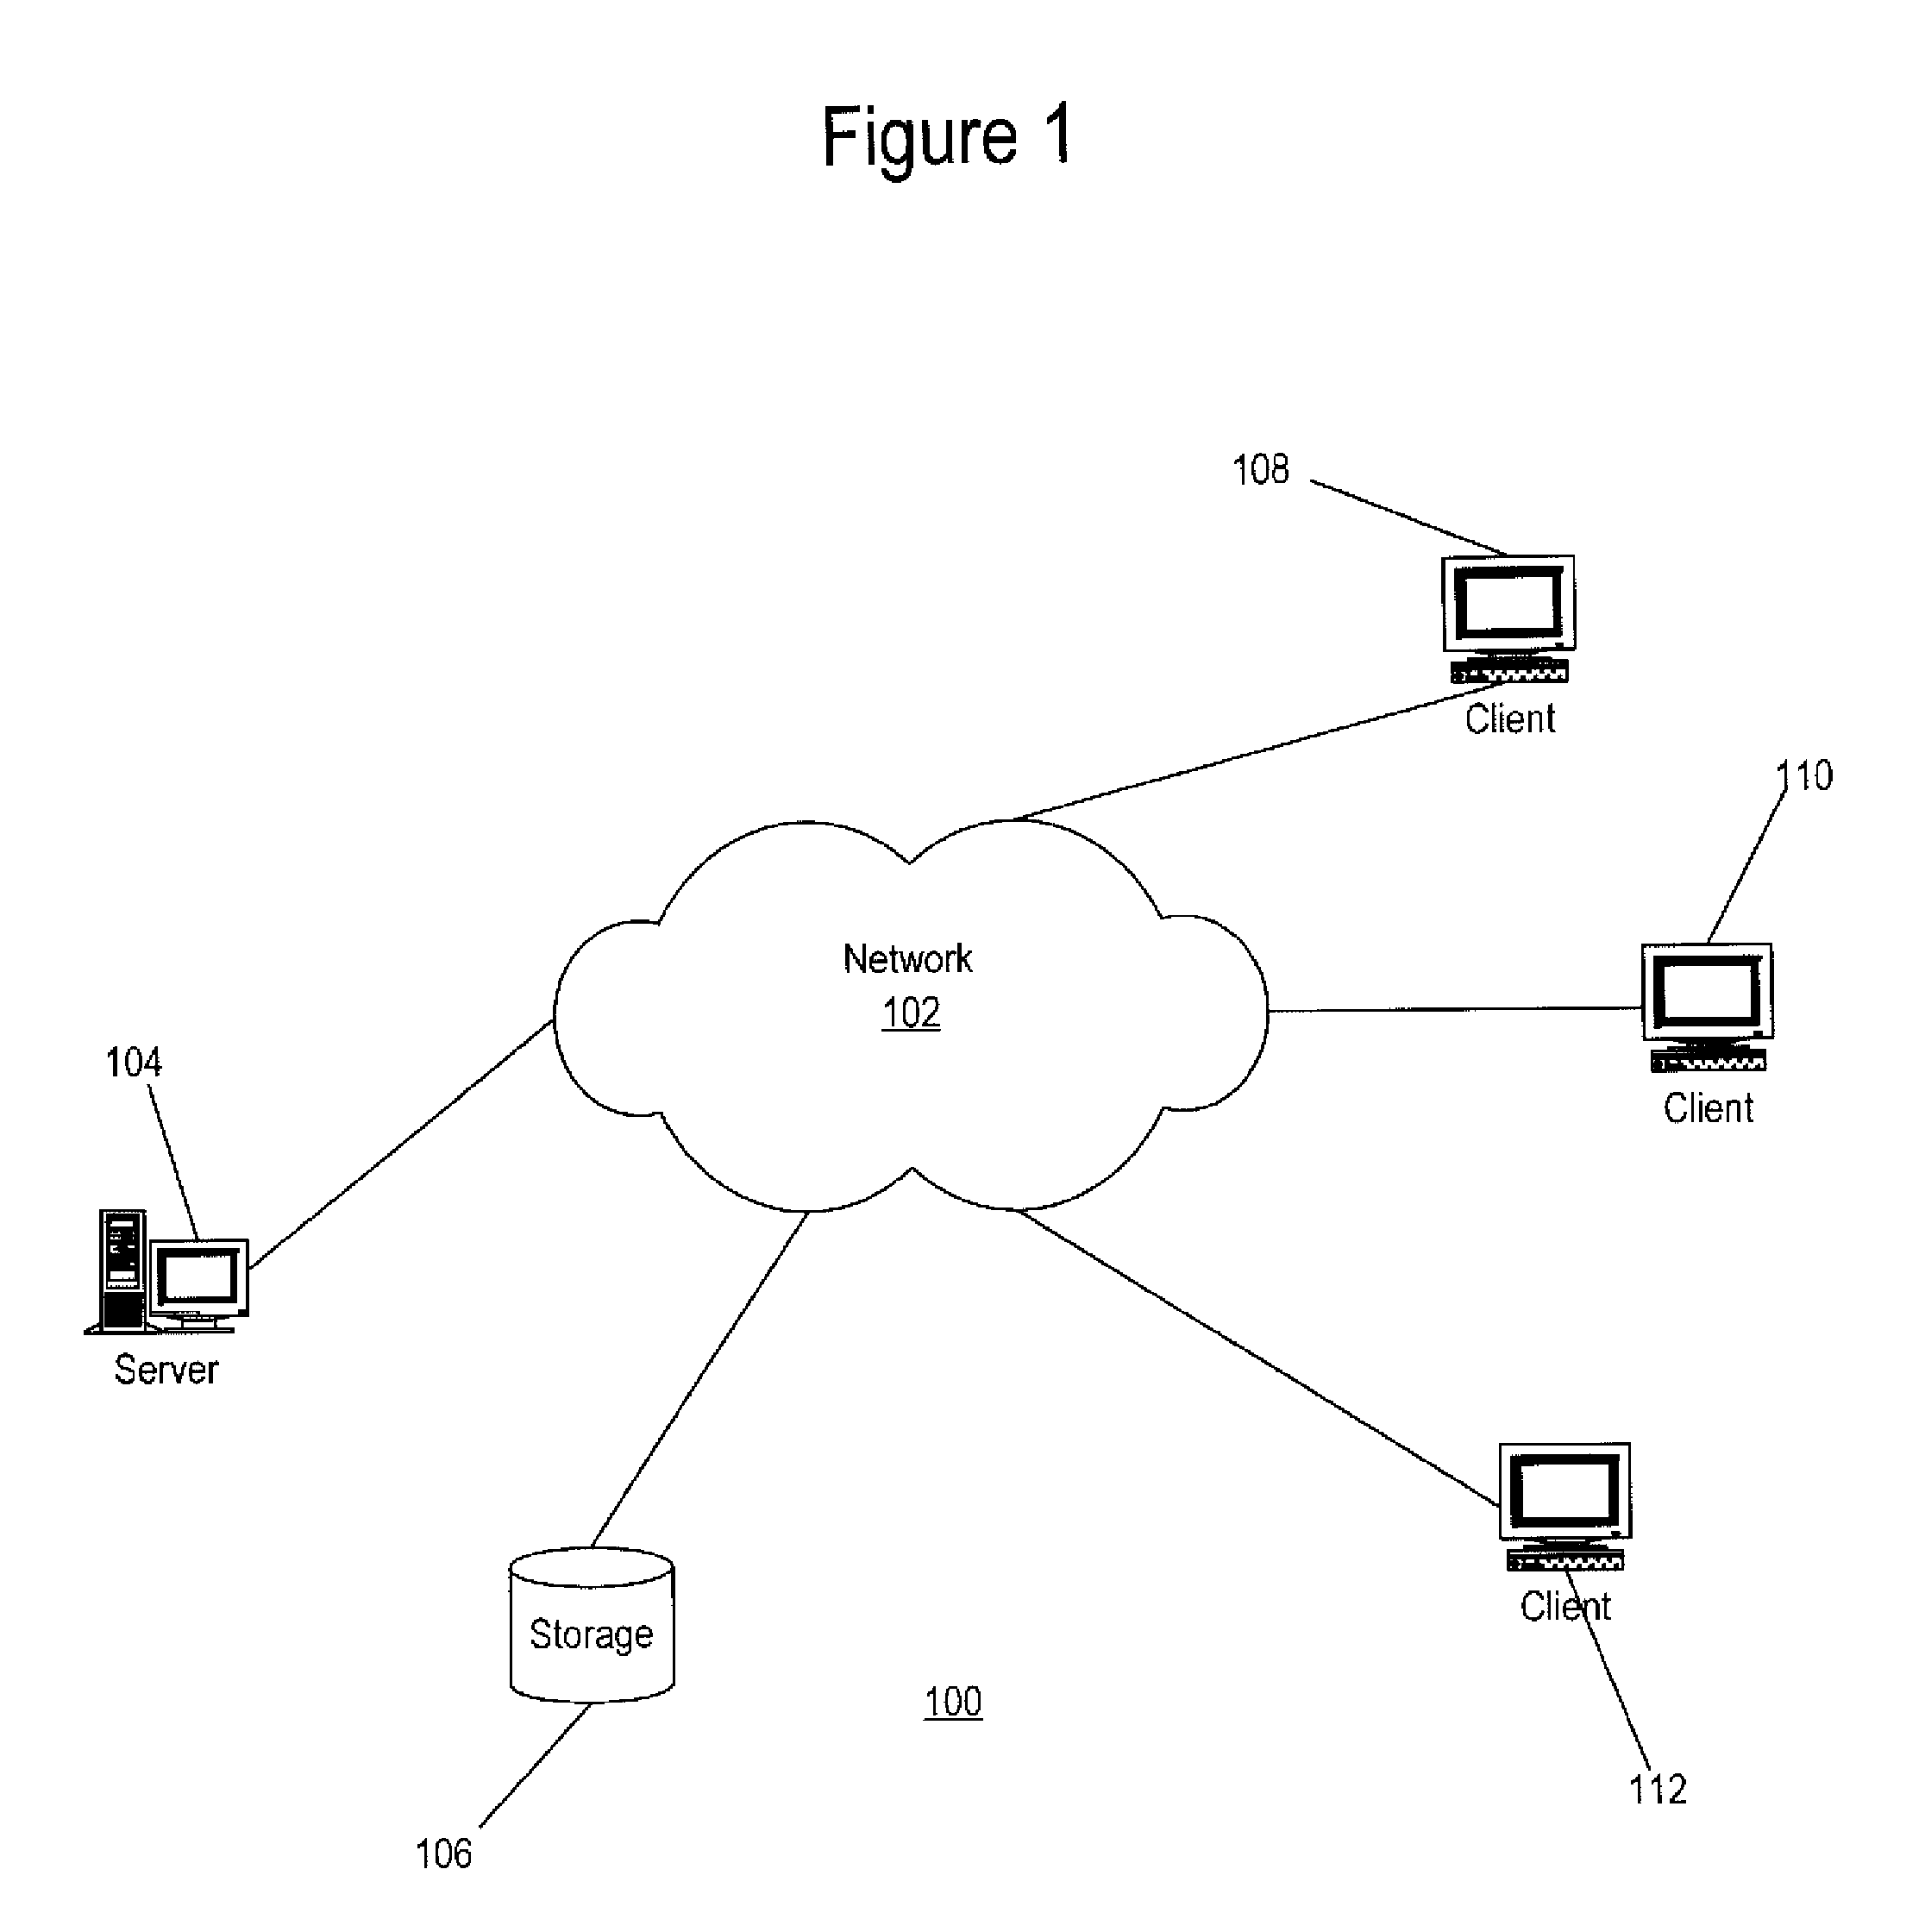 Method and System for Tracing Profiling Information Using Per Thread Metric Variables with Reused Kernel Threads